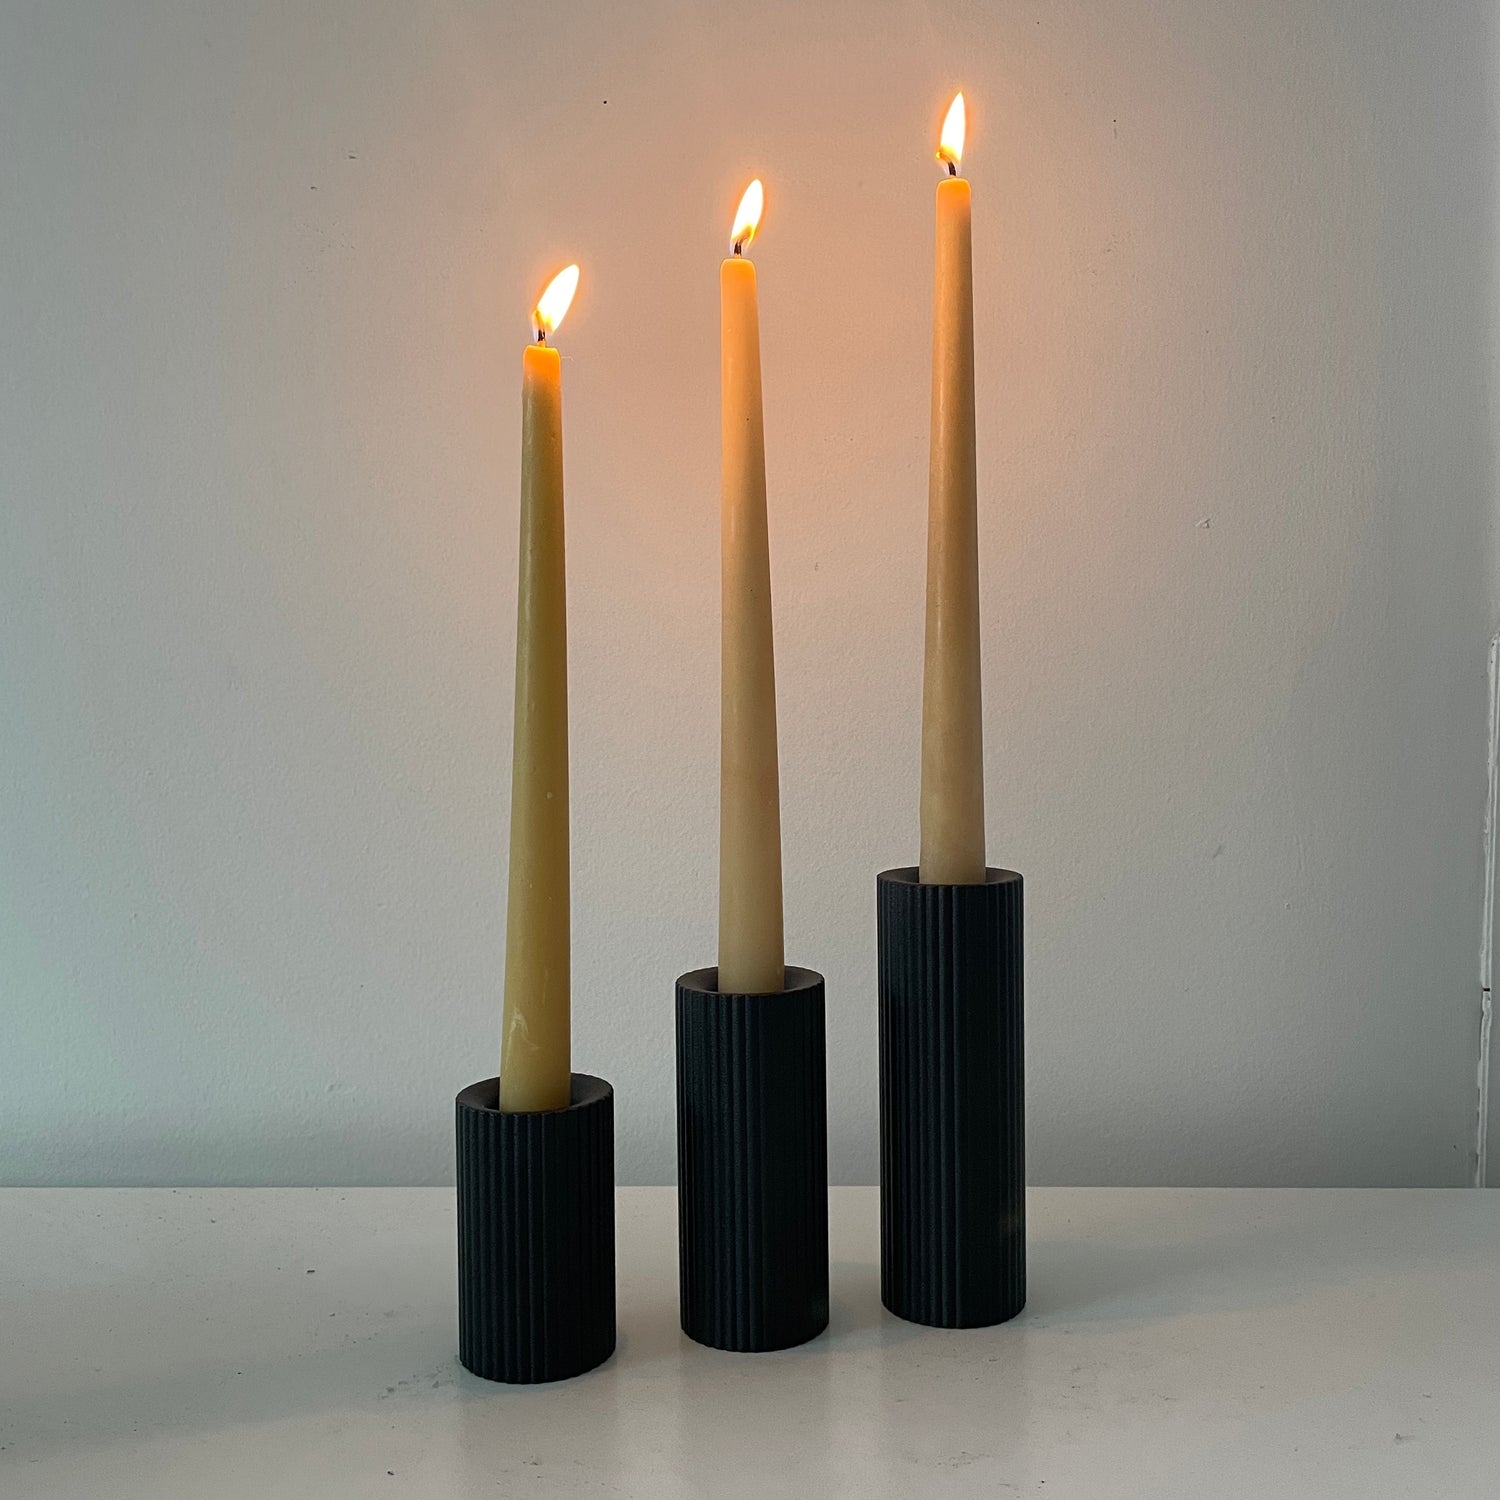 10 benefits of beeswax candles and why to switch